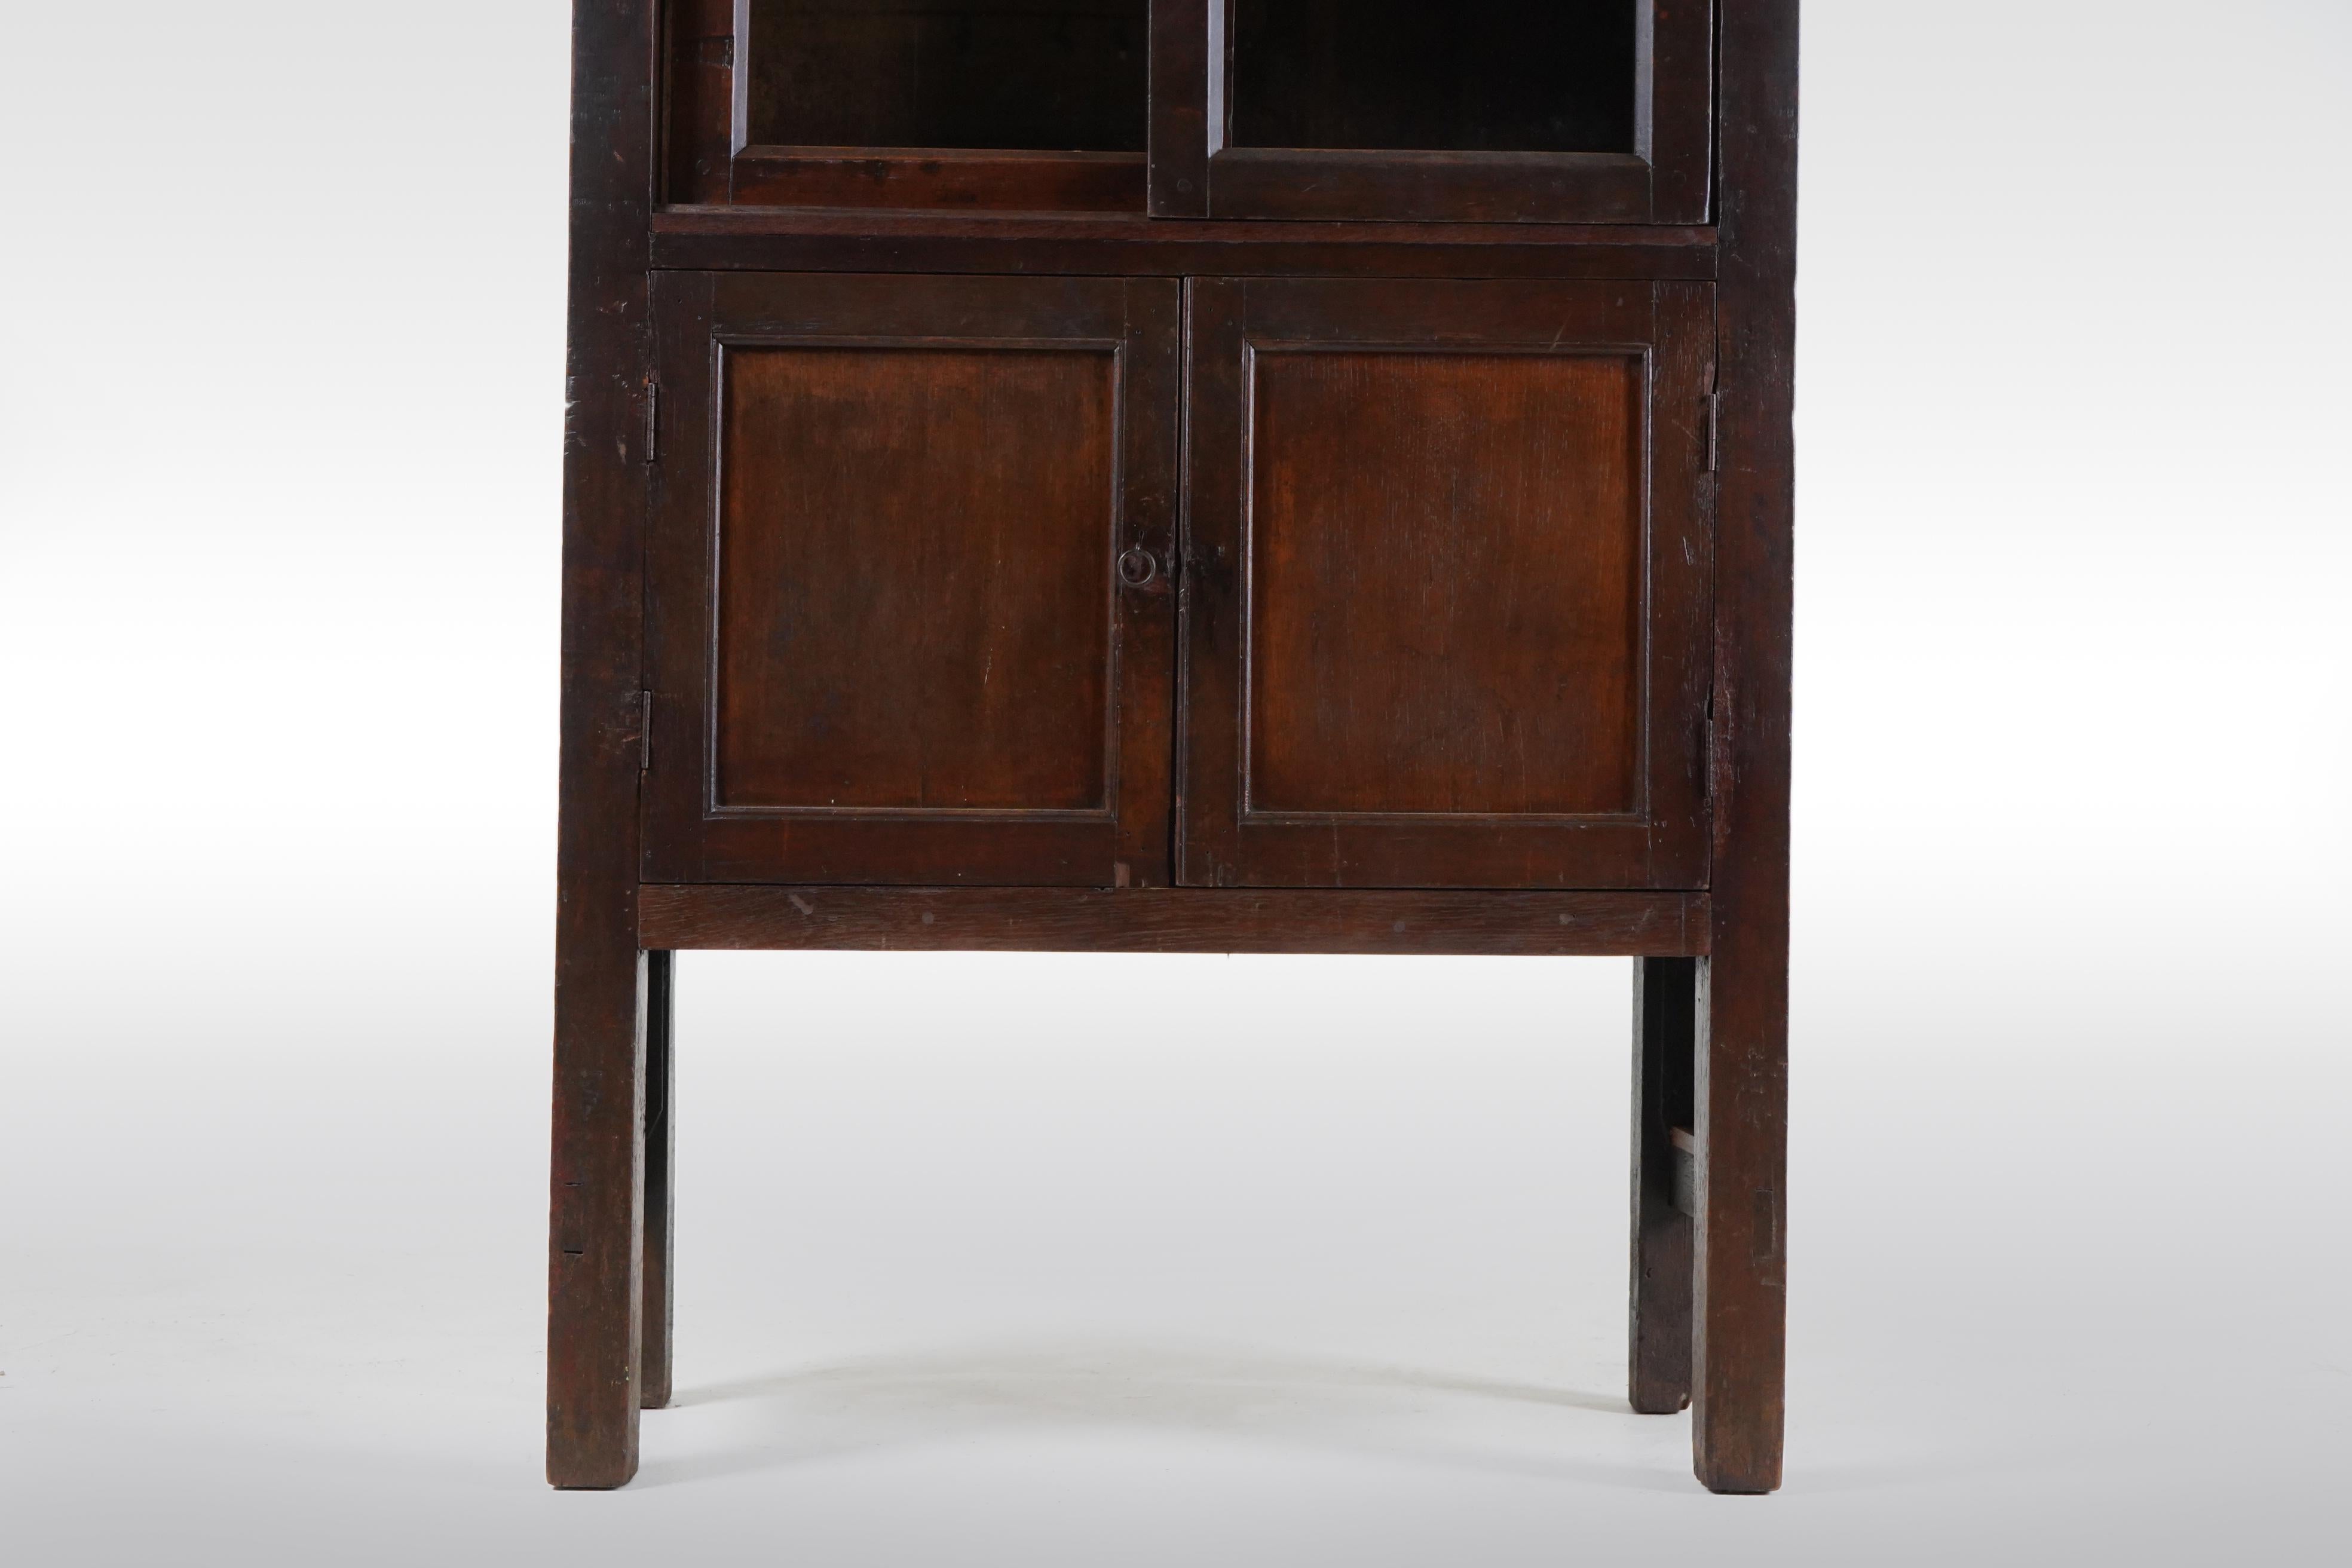 A British Colonial Teak Wood  Book Cabinet  2